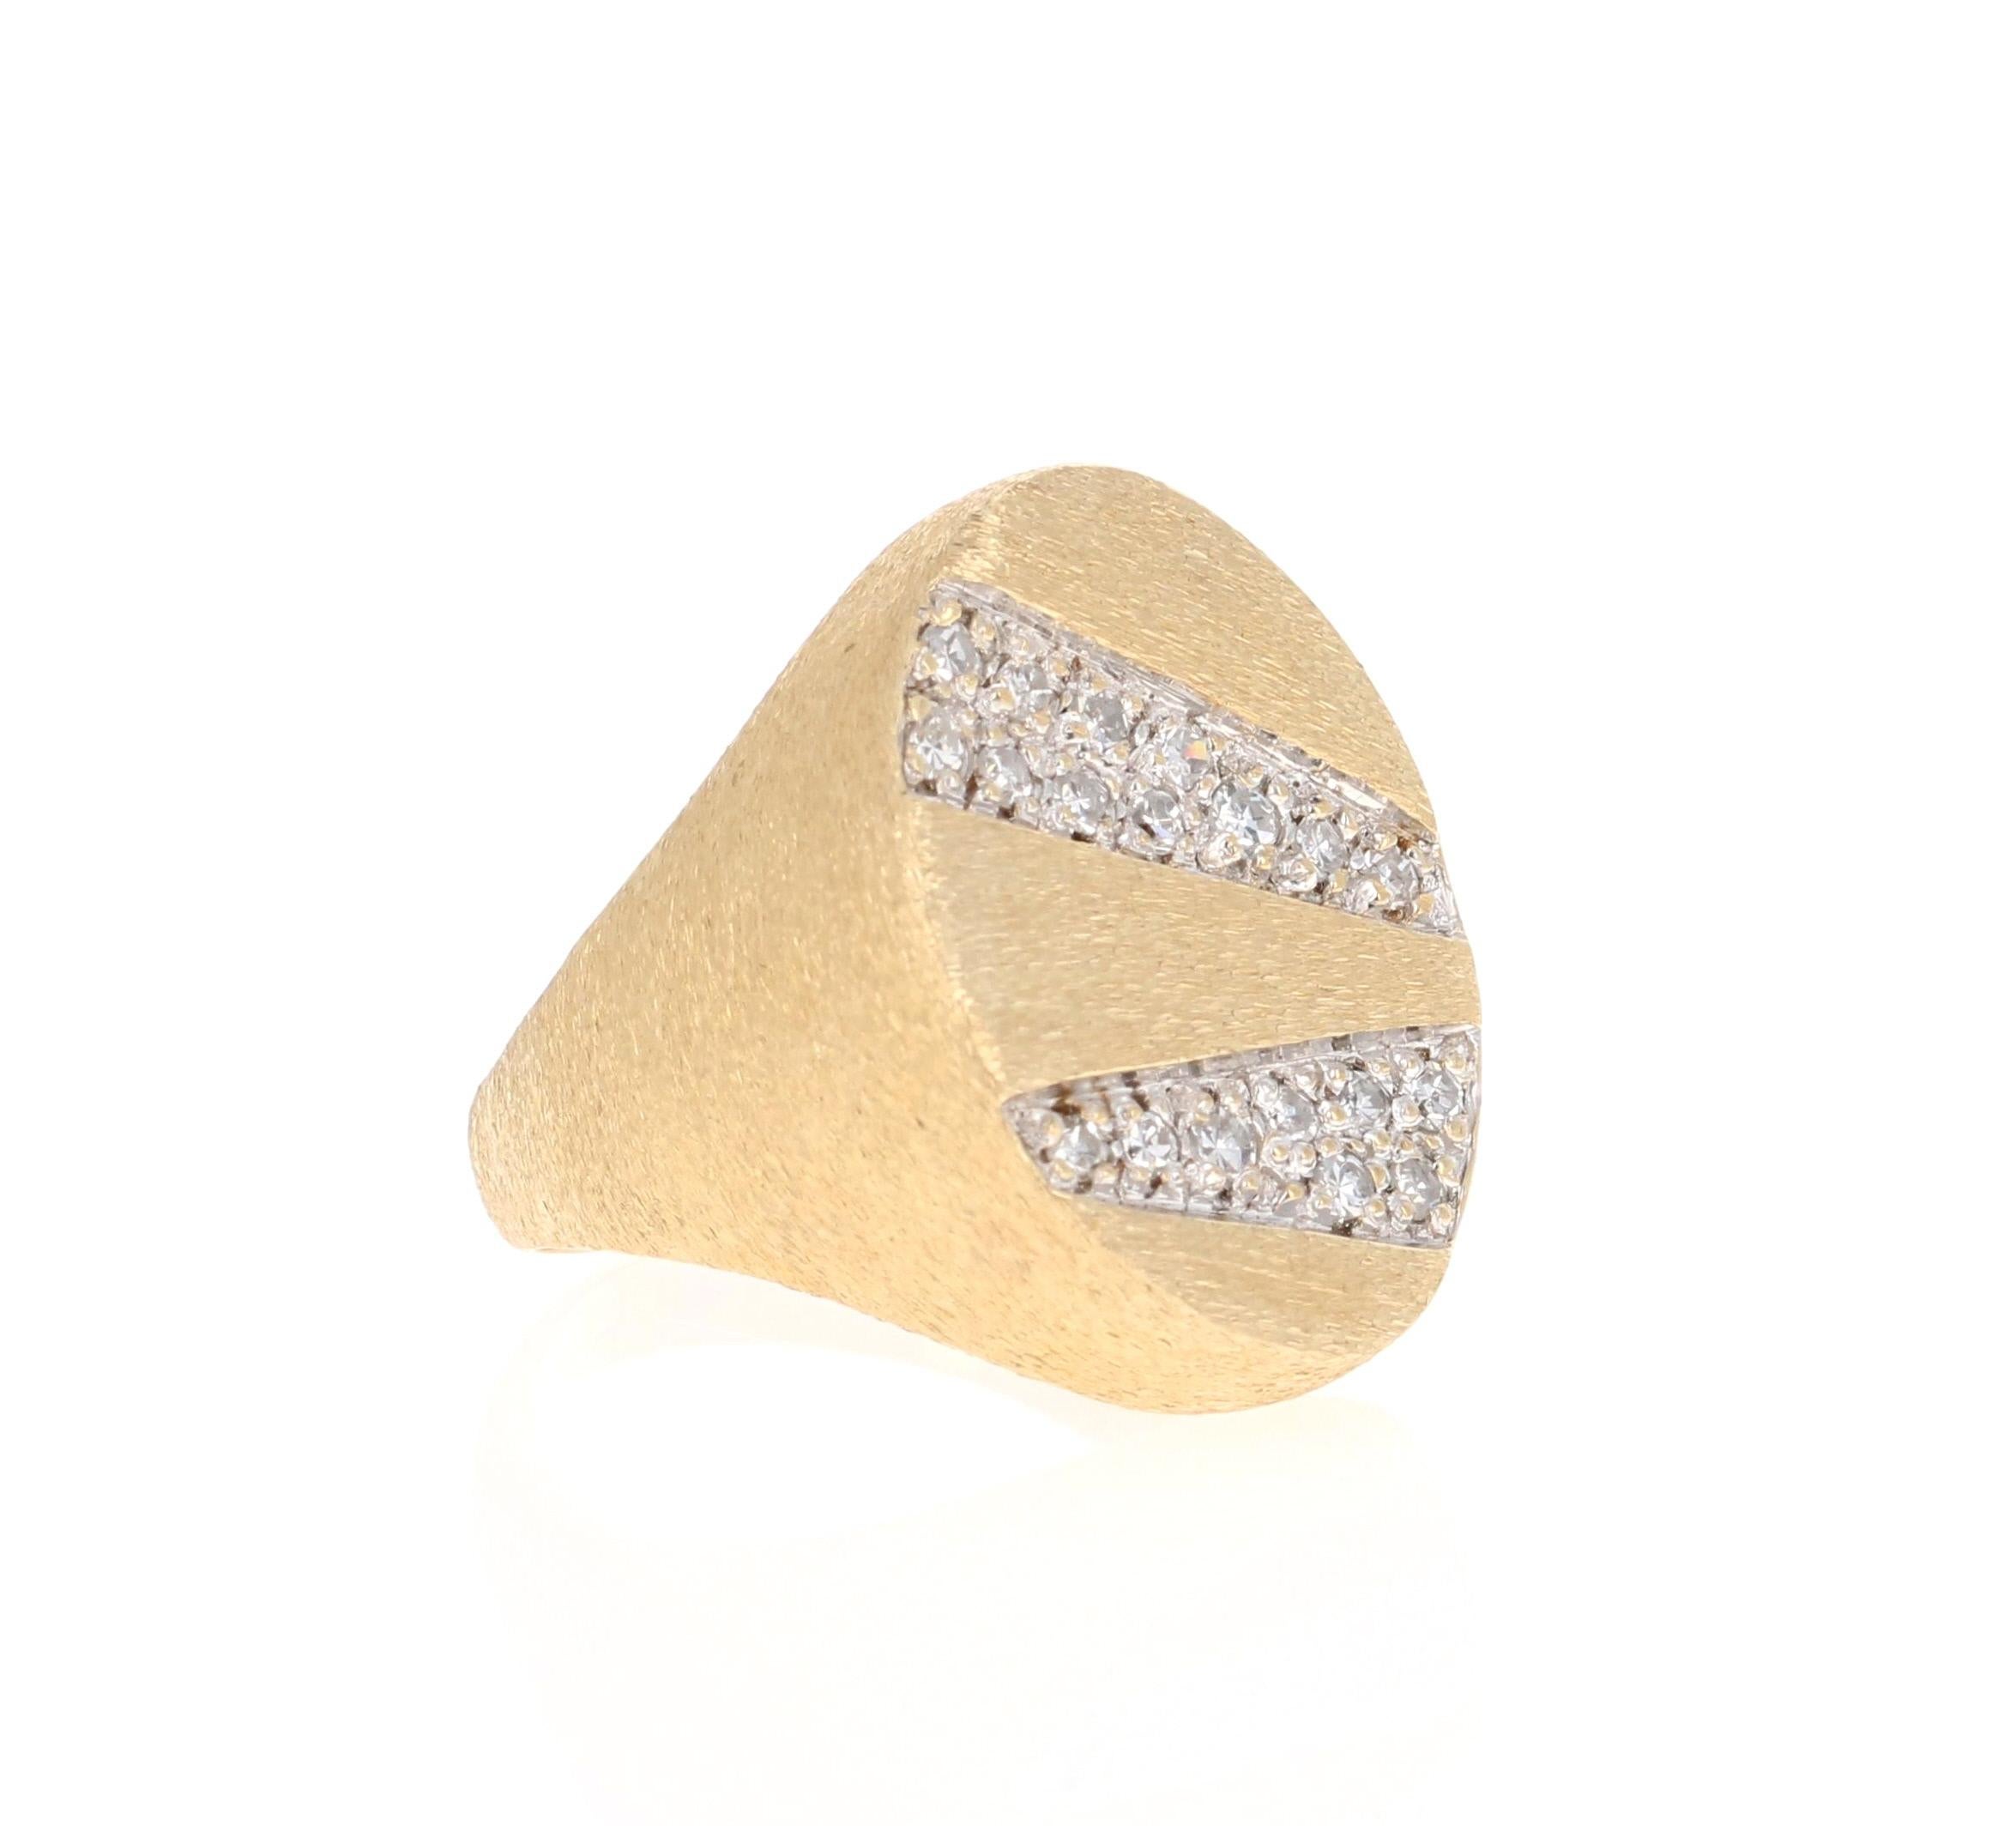 This ring has a cluster of diamonds that weigh 0.35 carats. (Clarity: SI1, Color: F)

It is beautifully set in a brushed 14 Karat Yellow Gold and weighs approximately 7.0 grams

The ring is a size 7 and can be re-sized free of charge. 


